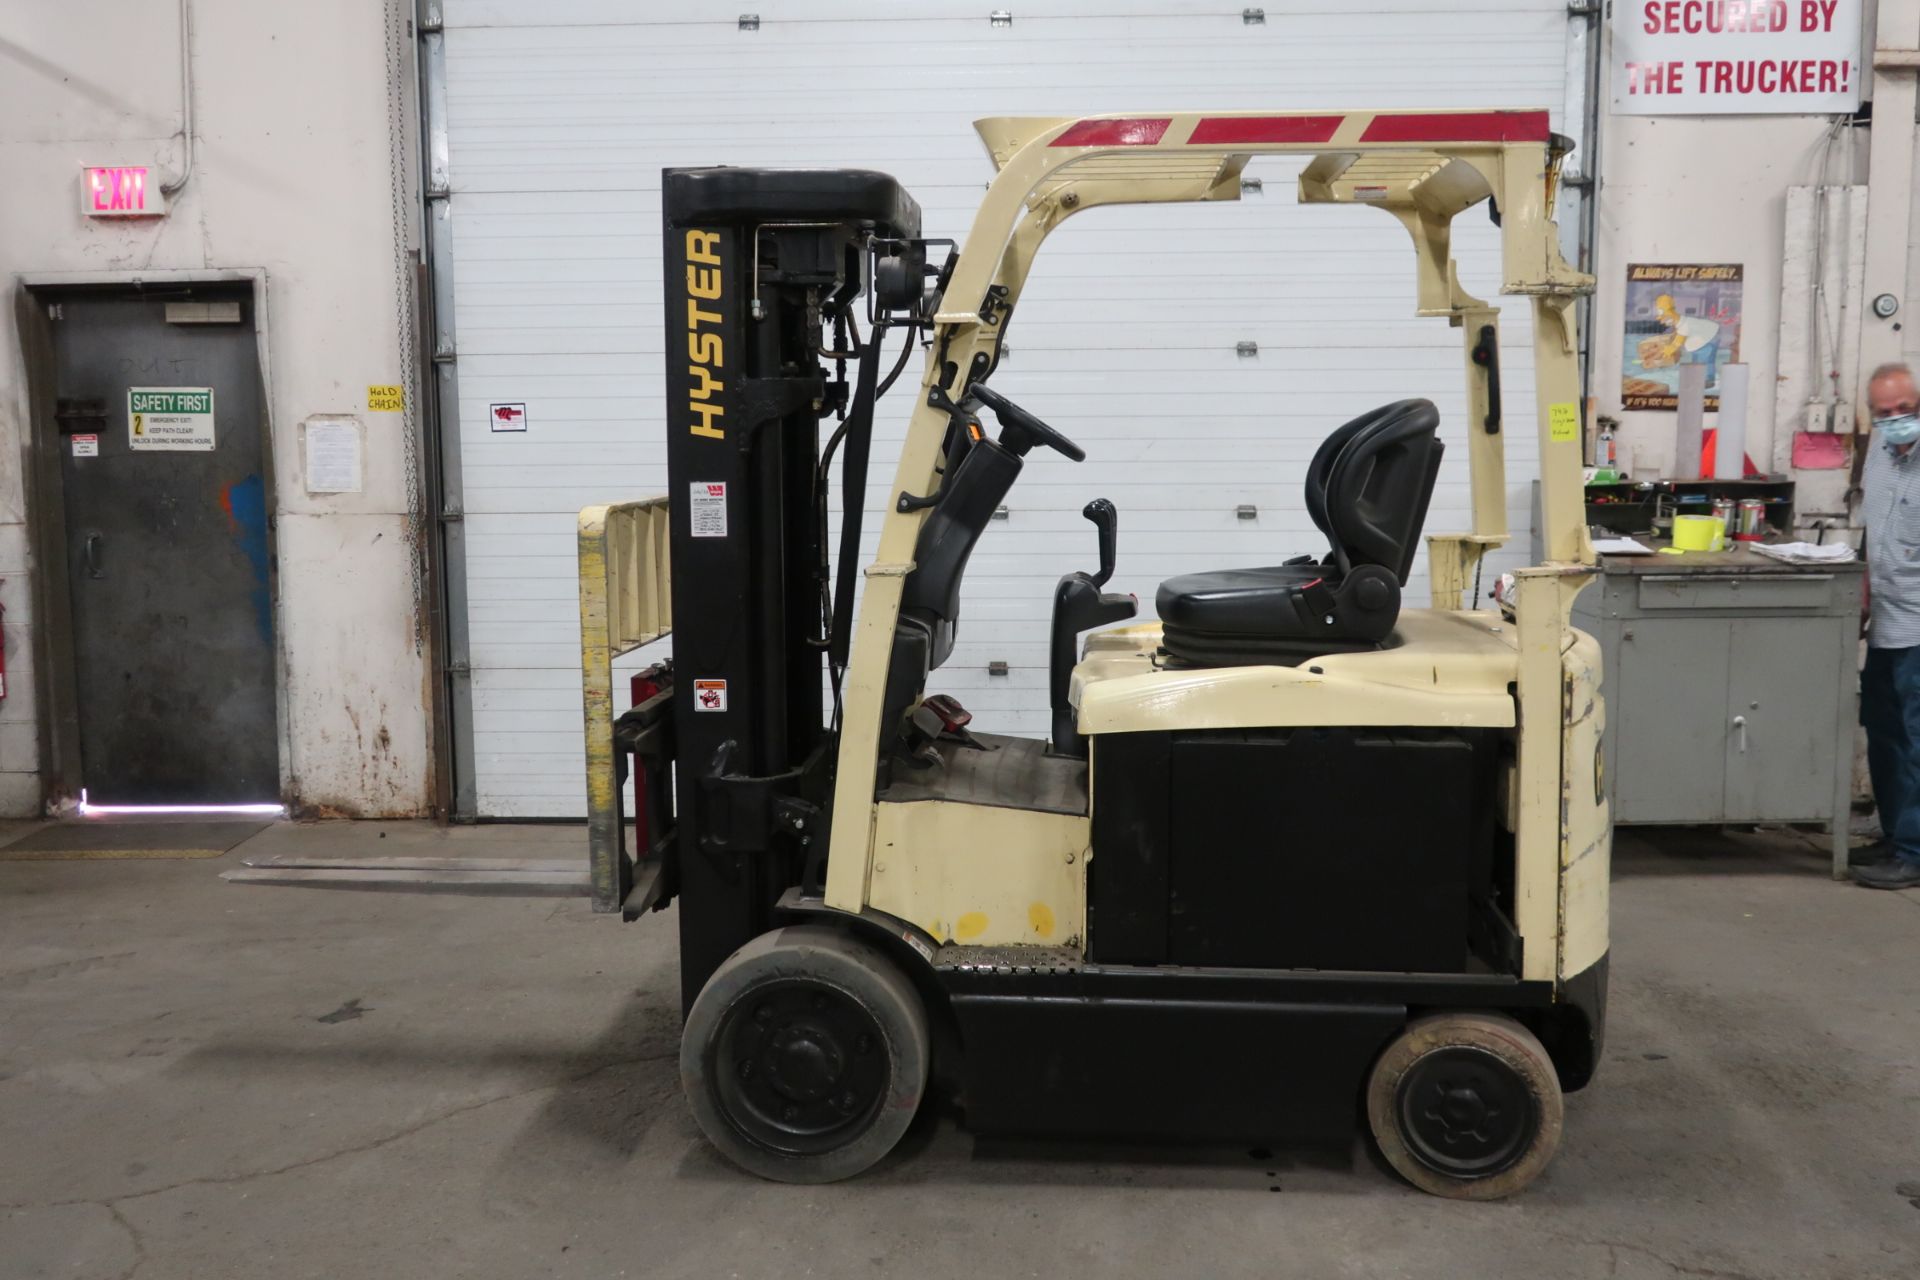 FREE CUSTOMS - 2014 Hyster 5000lbs Capacity Forklift with 4-stage mast - electric with sideshift